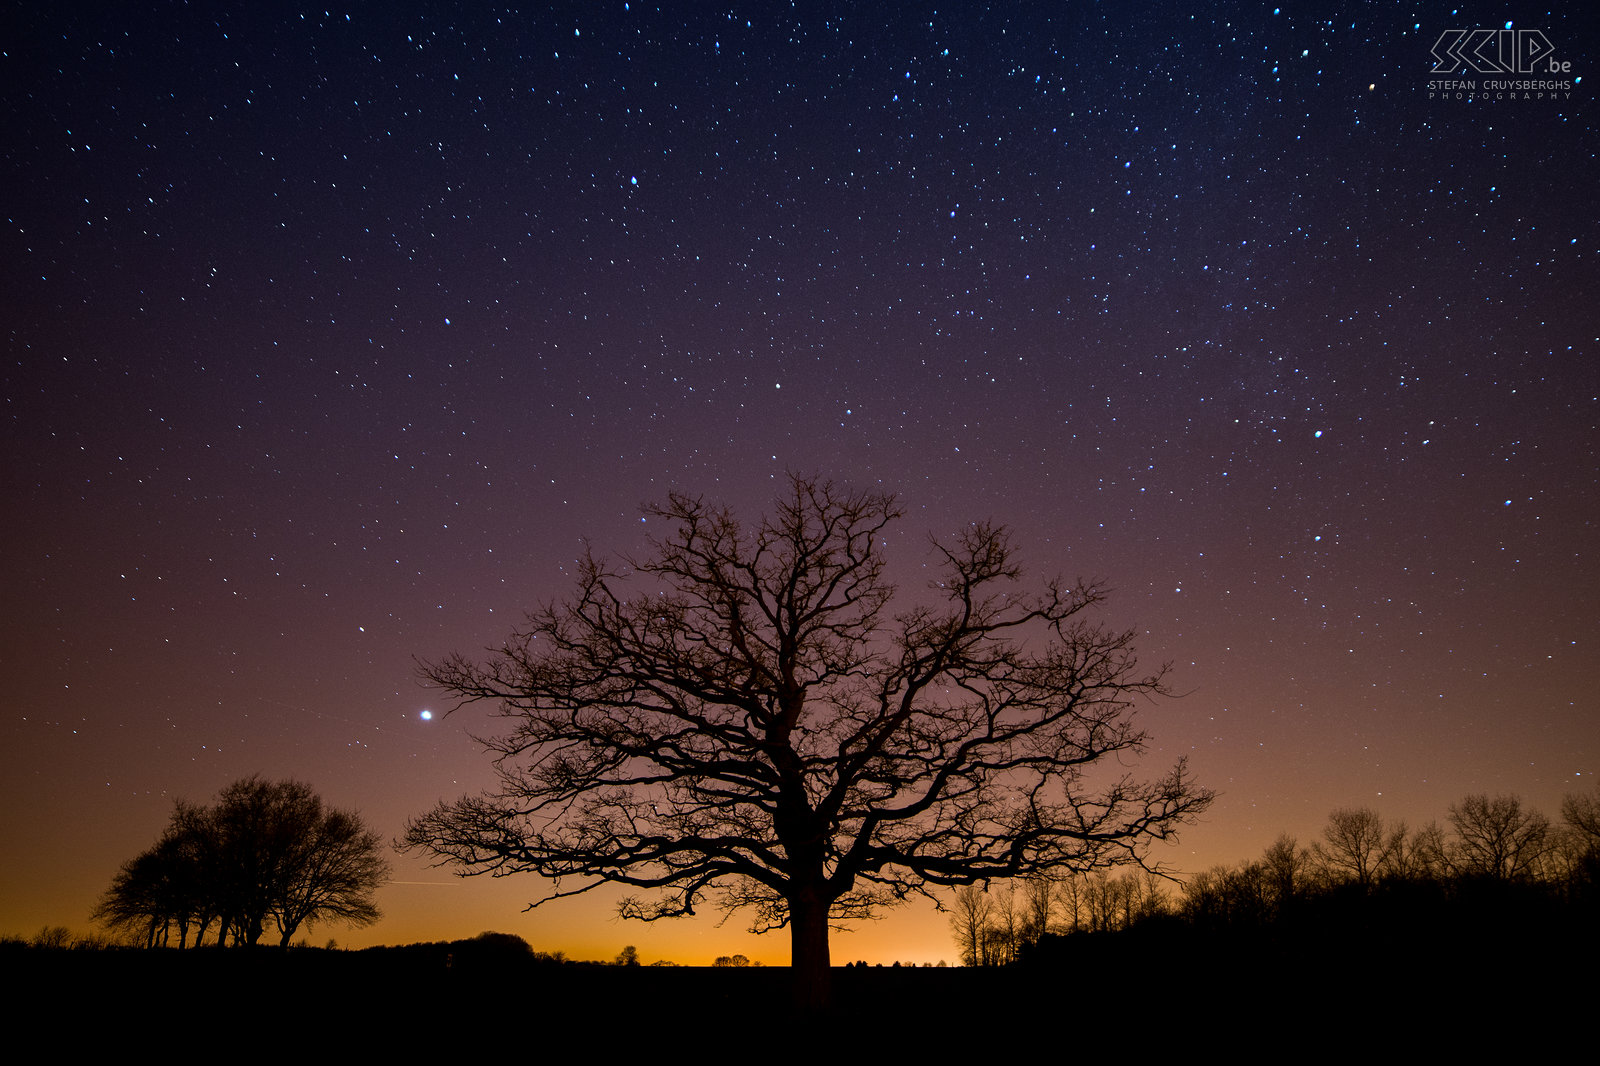 Hageland by night - Old oak tree in Kaggevinne The old oak of Kaggevine (Diest) is probably 150 years old. Despite the light pollution on the horizon, many stars were visible on a cold winter evening. Stefan Cruysberghs